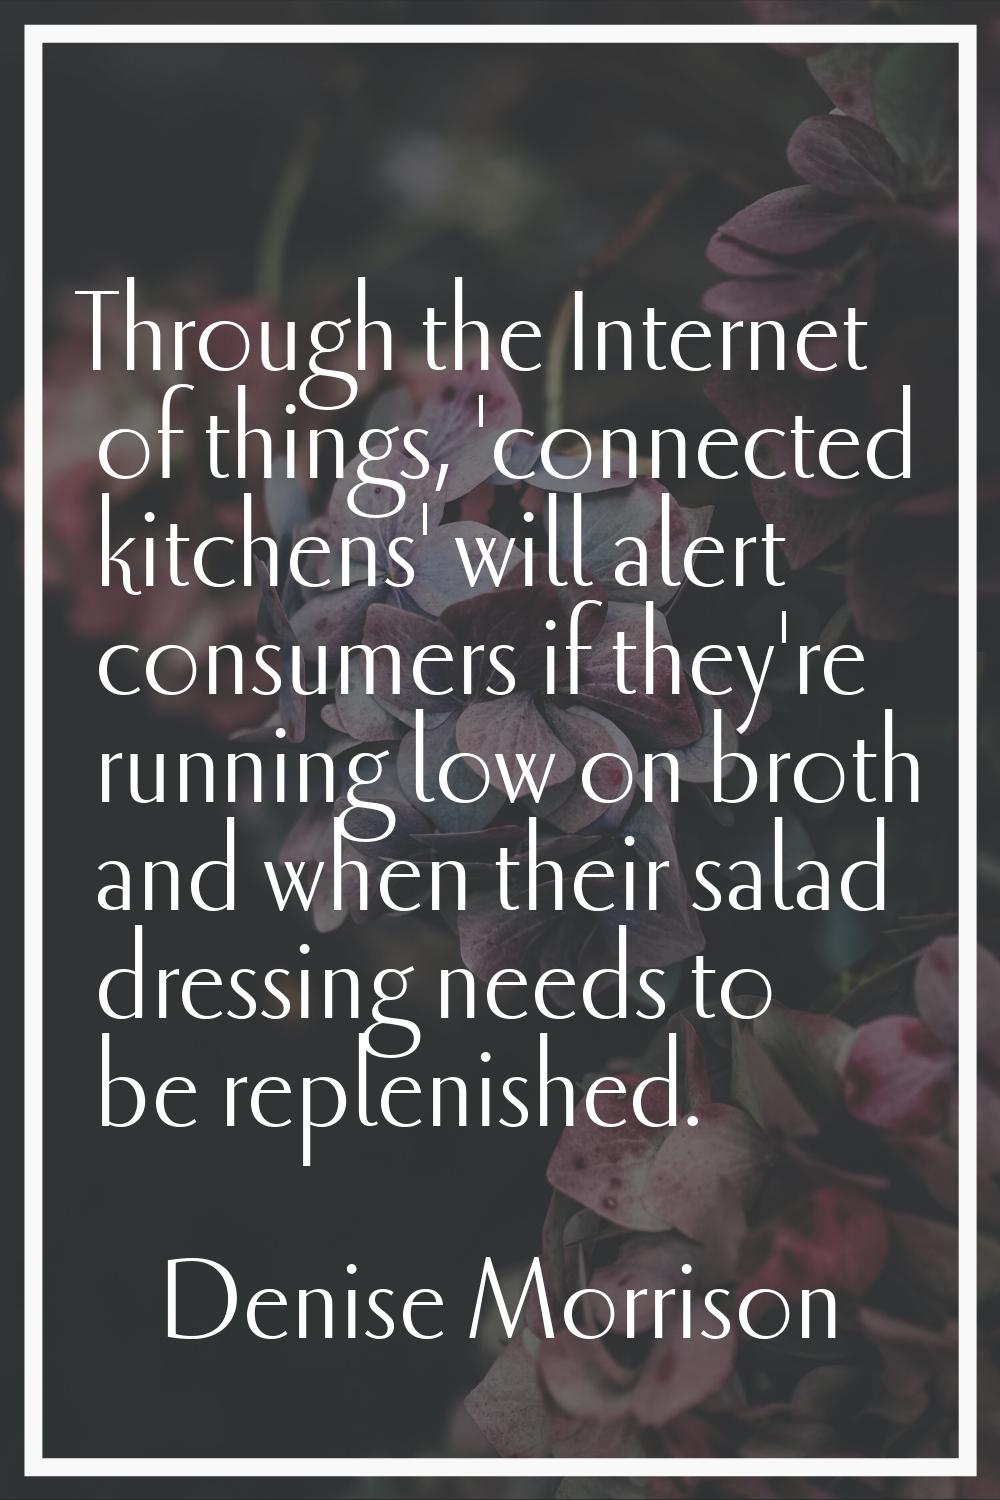 Through the Internet of things, 'connected kitchens' will alert consumers if they're running low on